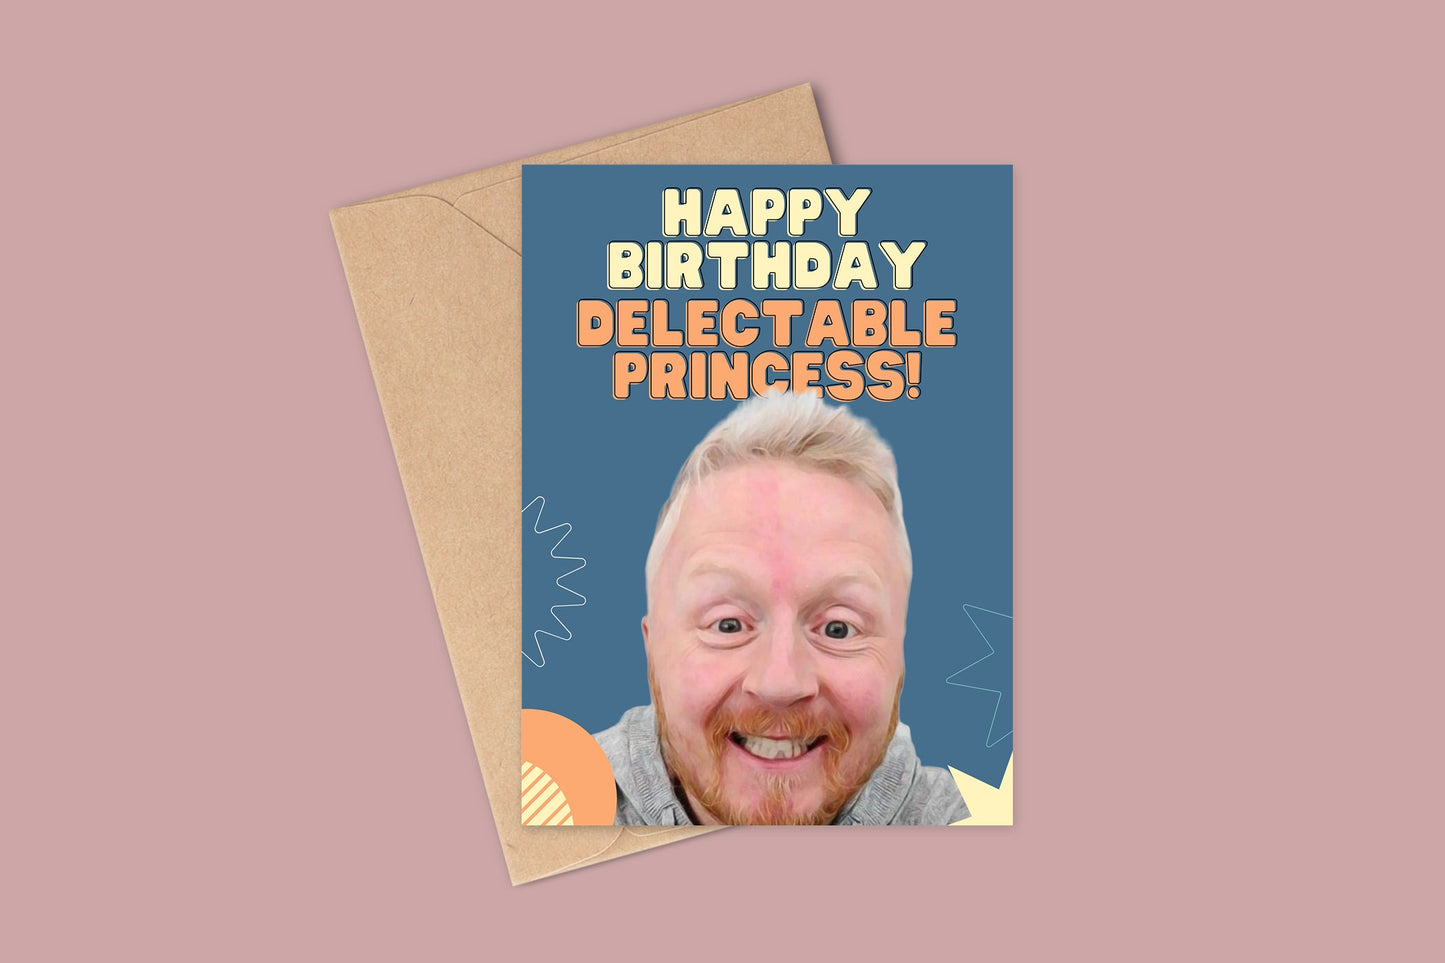 Funny Birthday Card For Him or Her, Paul Breach, Funny Card, Birthday card, Funny Birthday Cards, Beauty Beyond the Eye